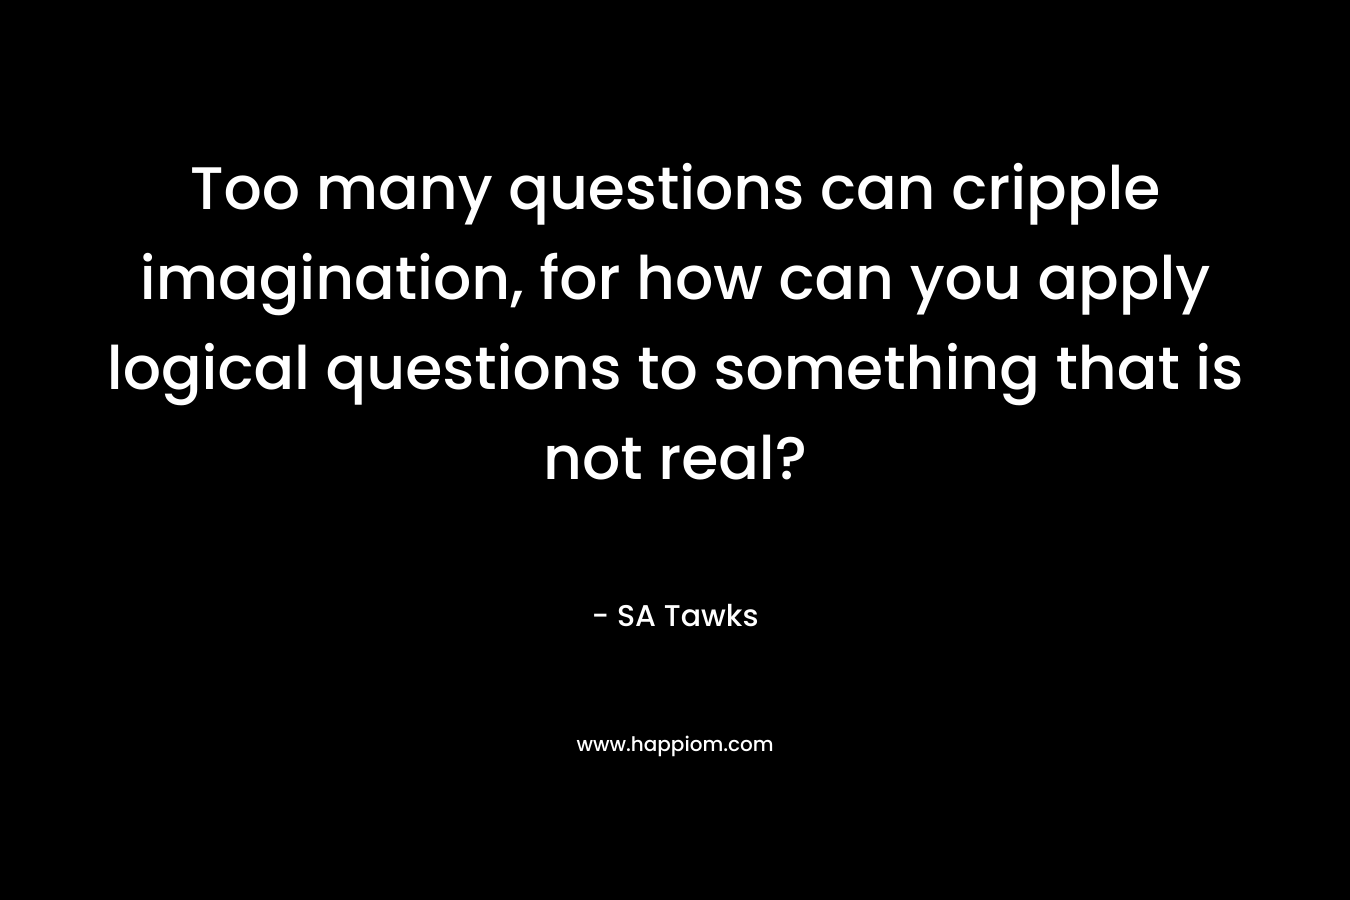 Too many questions can cripple imagination, for how can you apply logical questions to something that is not real?